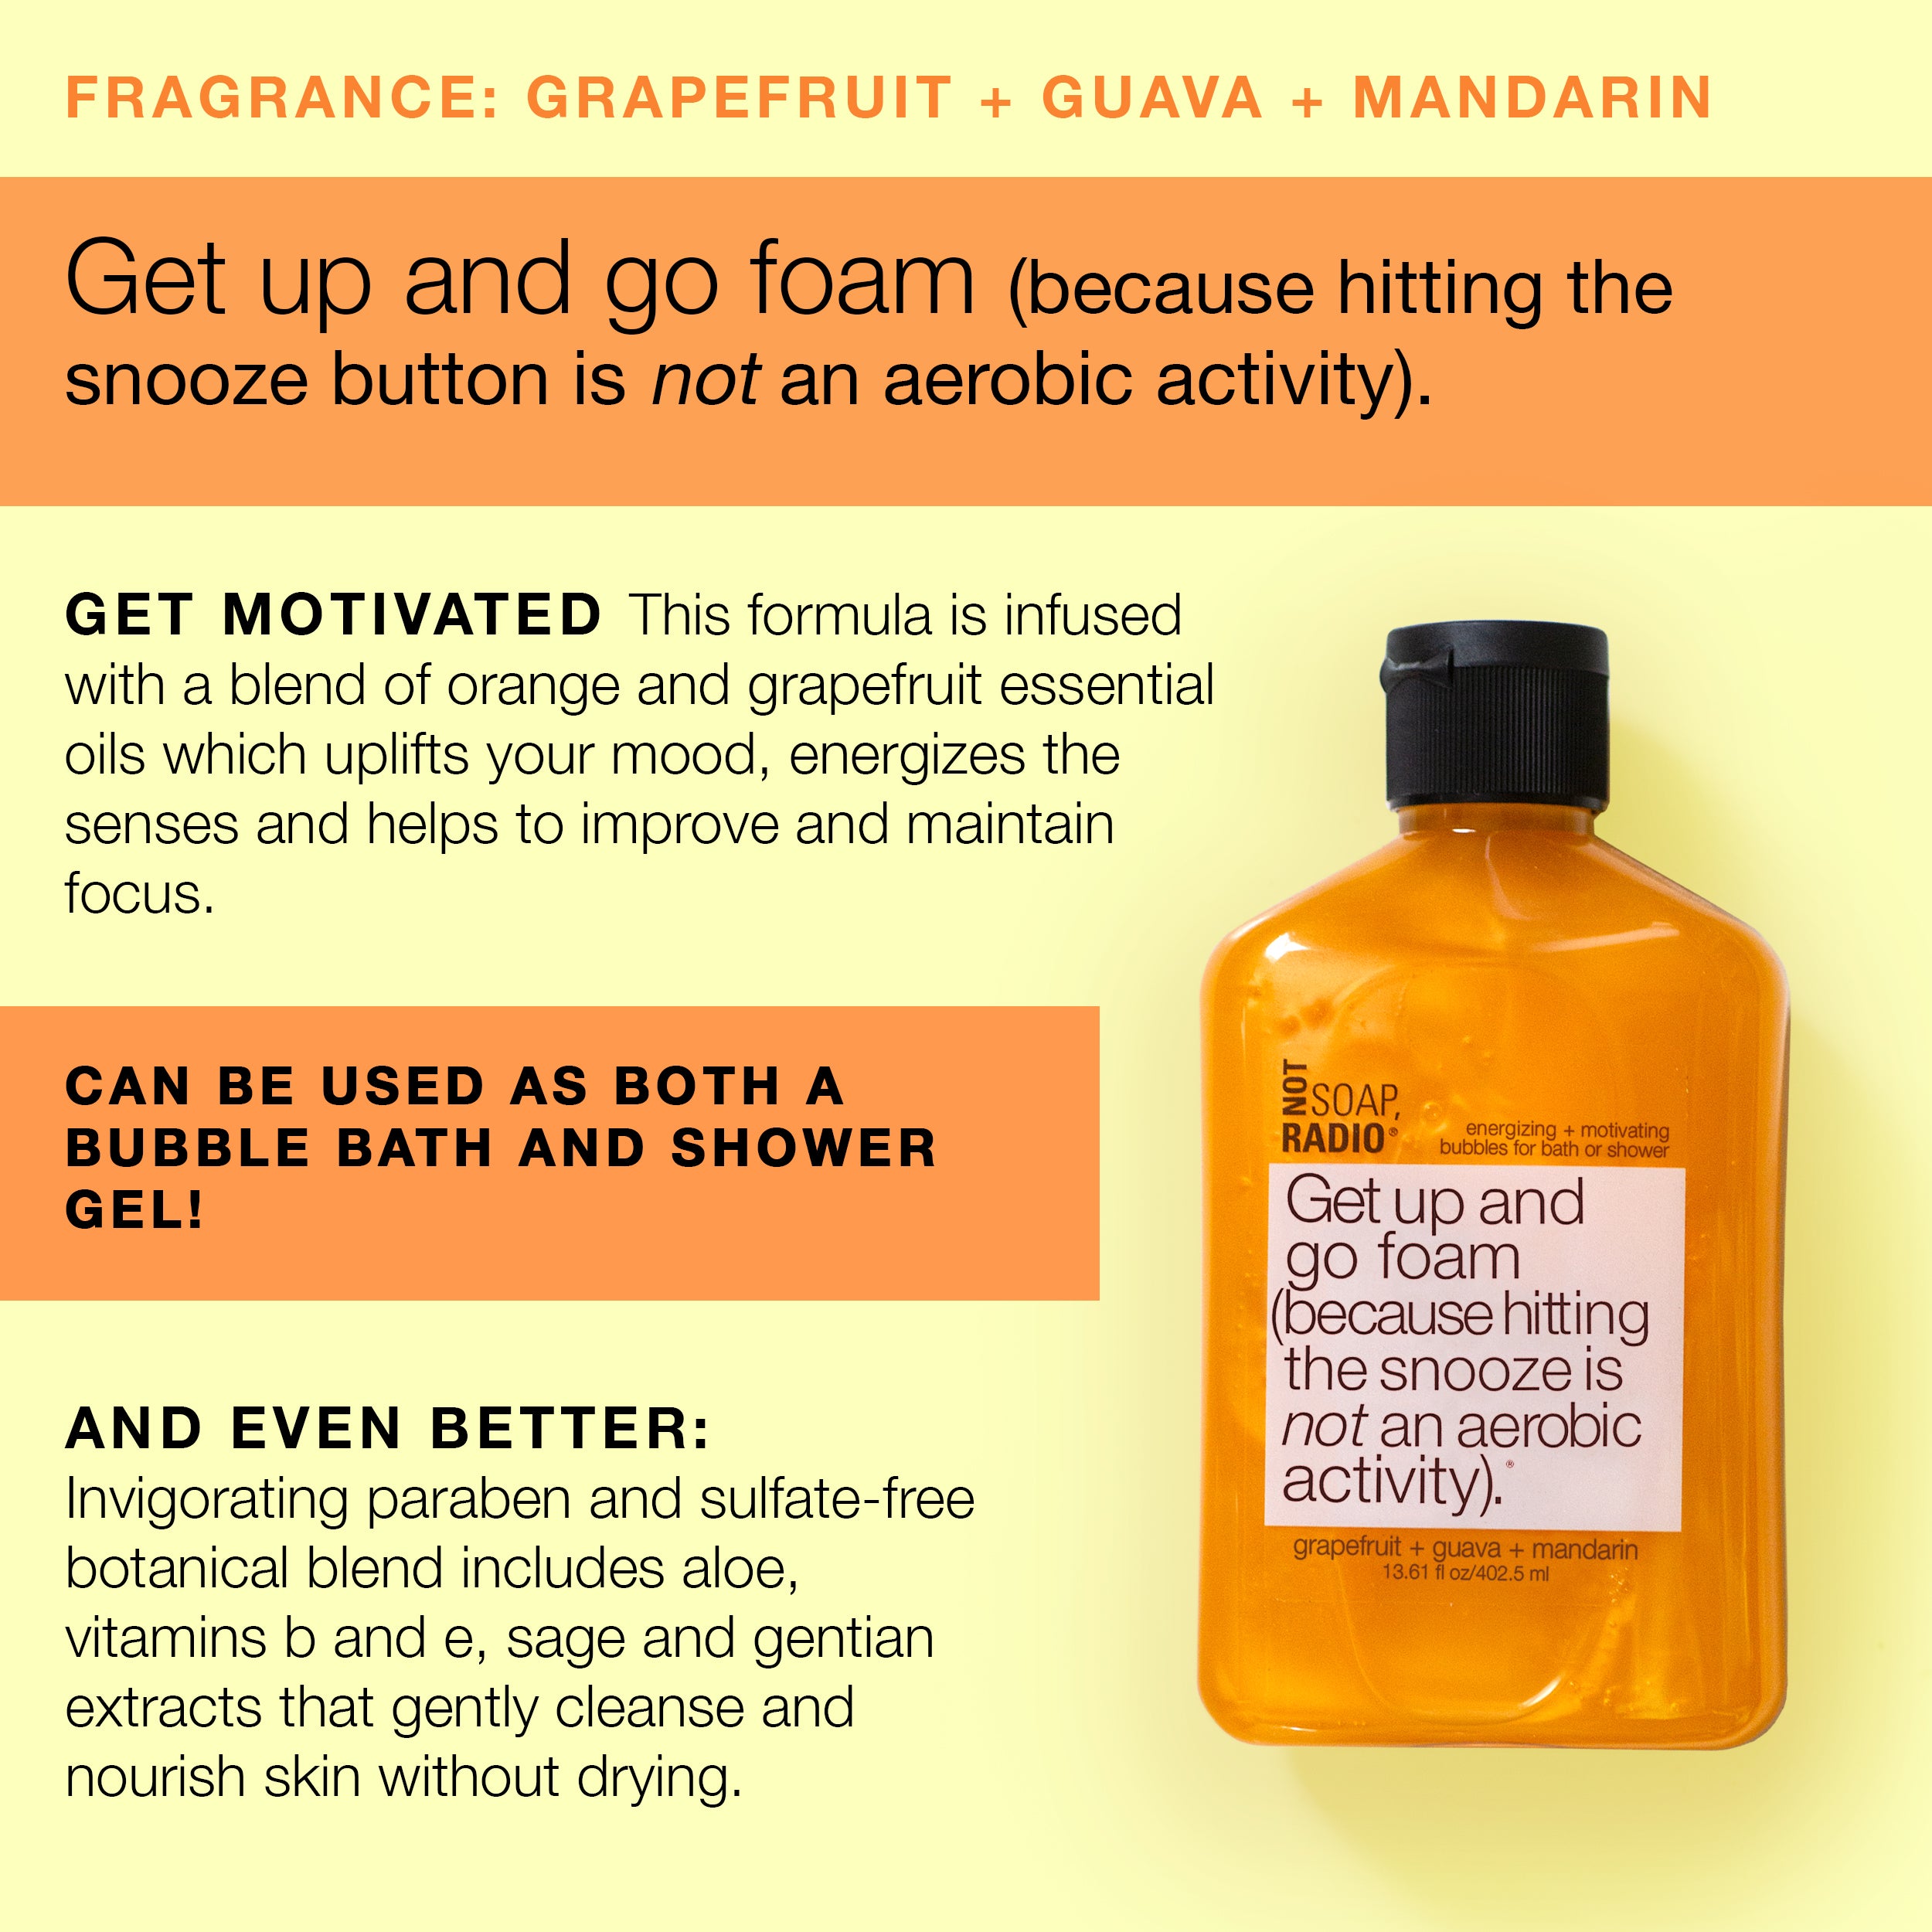 An infographic explaining the benefits and uses of the Not Soap Radio citrus shower gel.